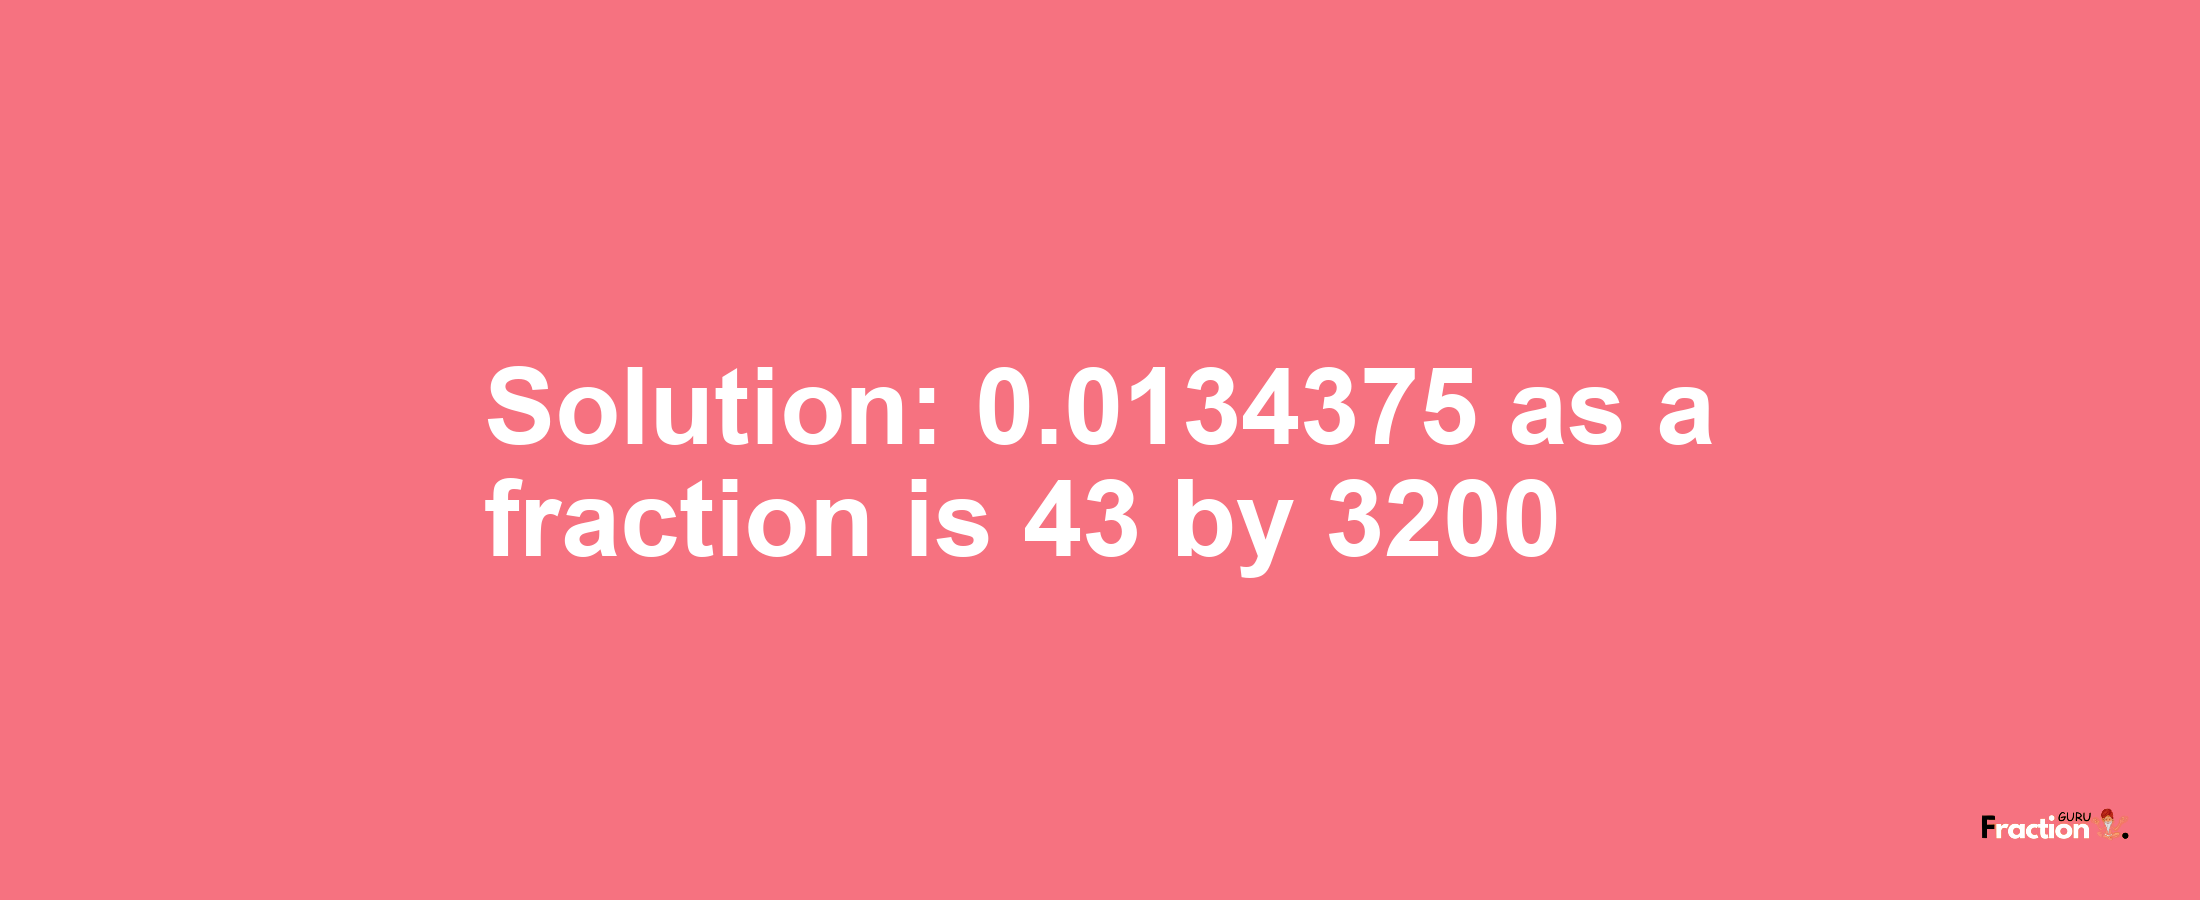 Solution:0.0134375 as a fraction is 43/3200